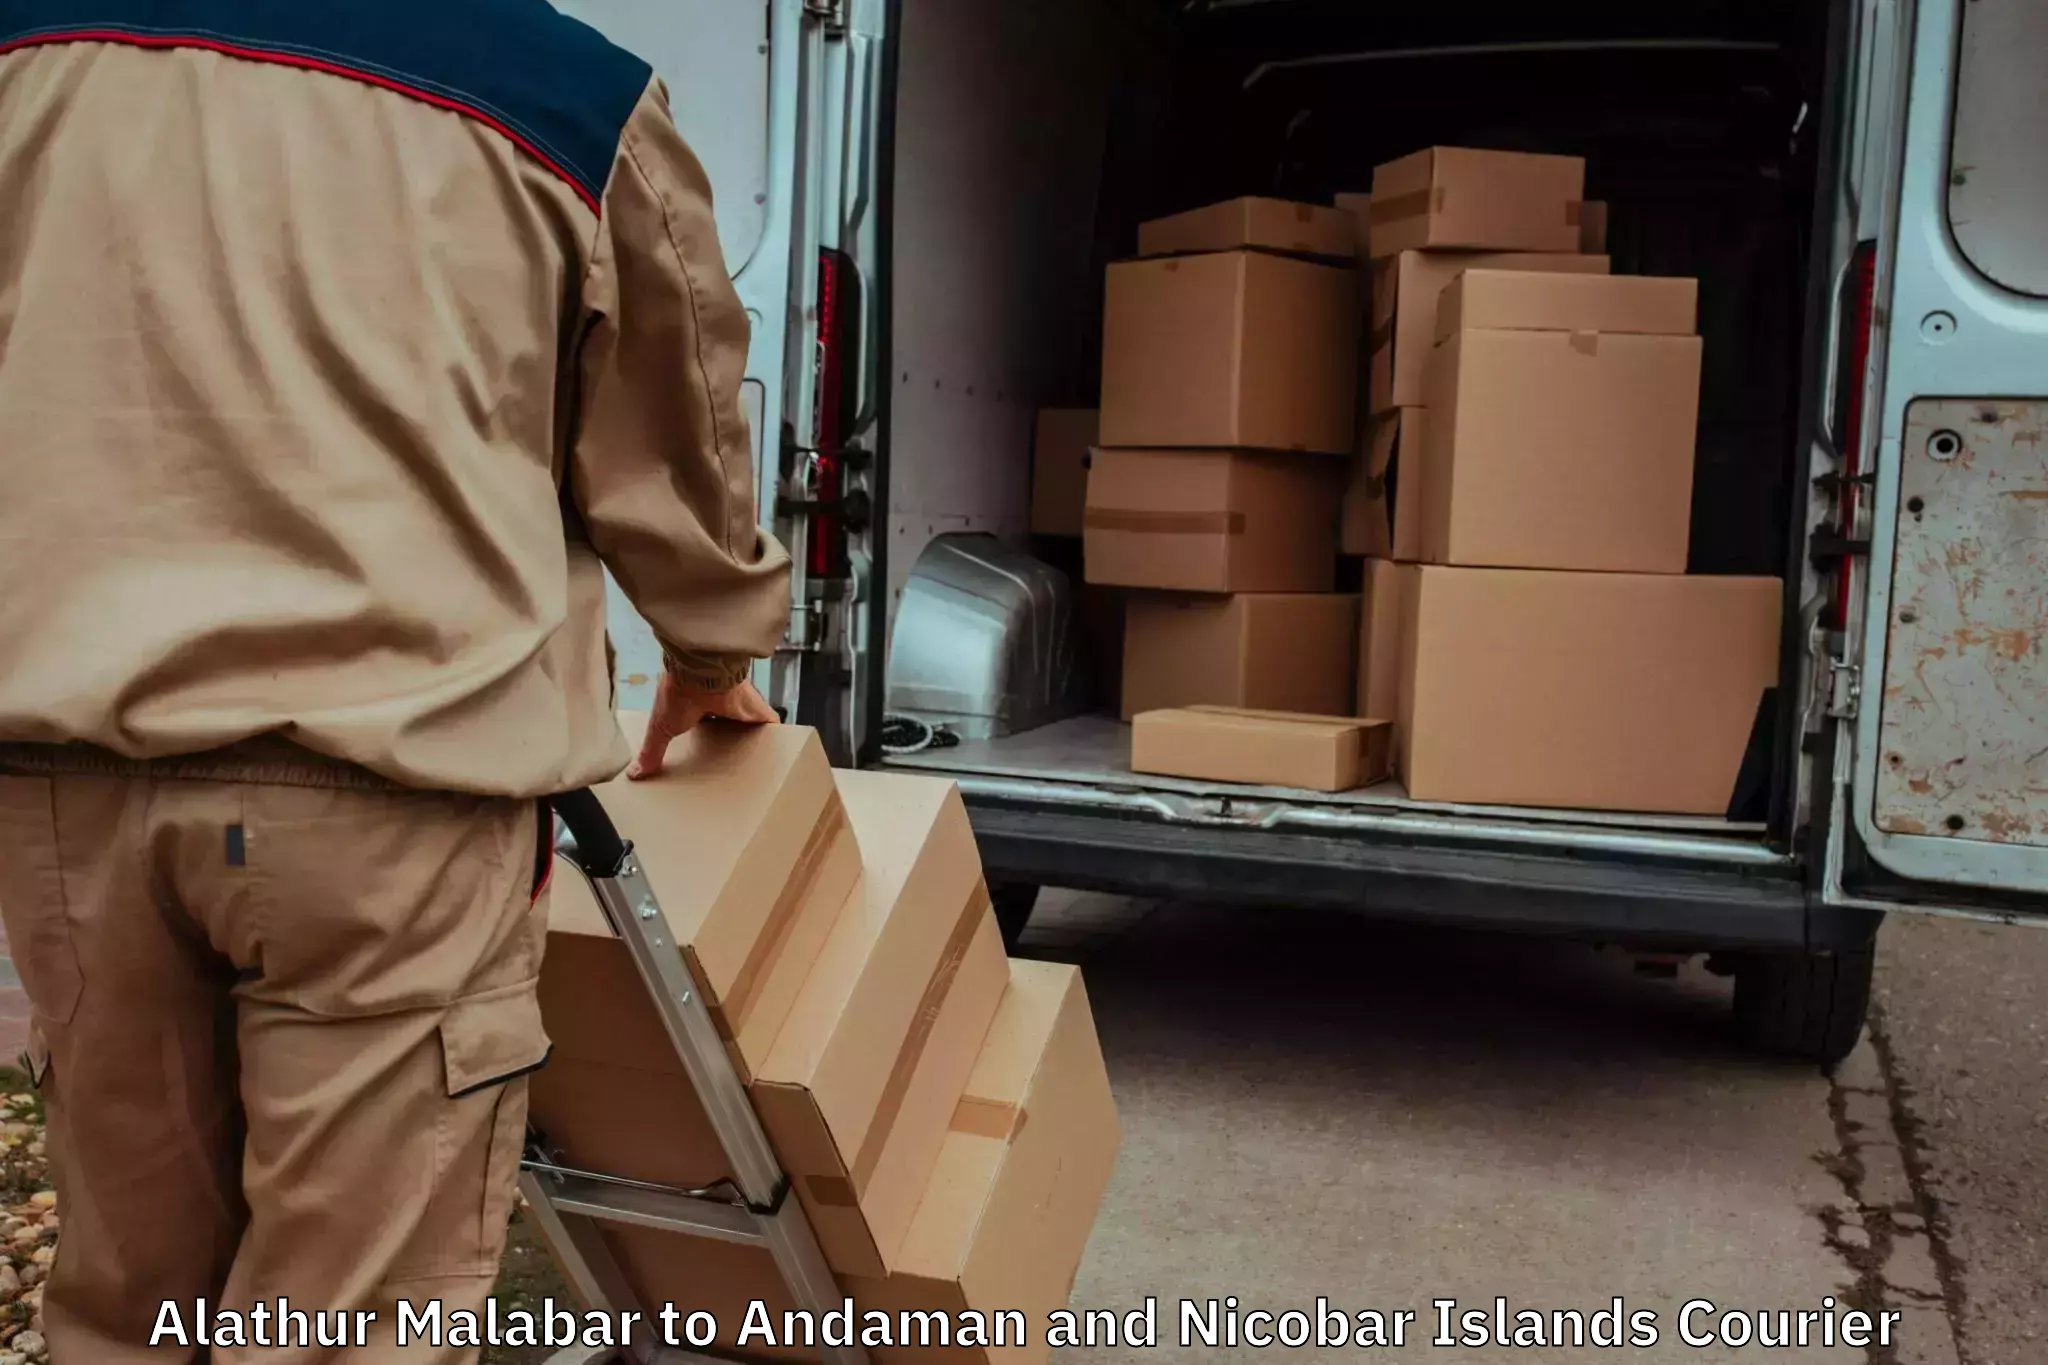 Furniture delivery service Alathur Malabar to Port Blair